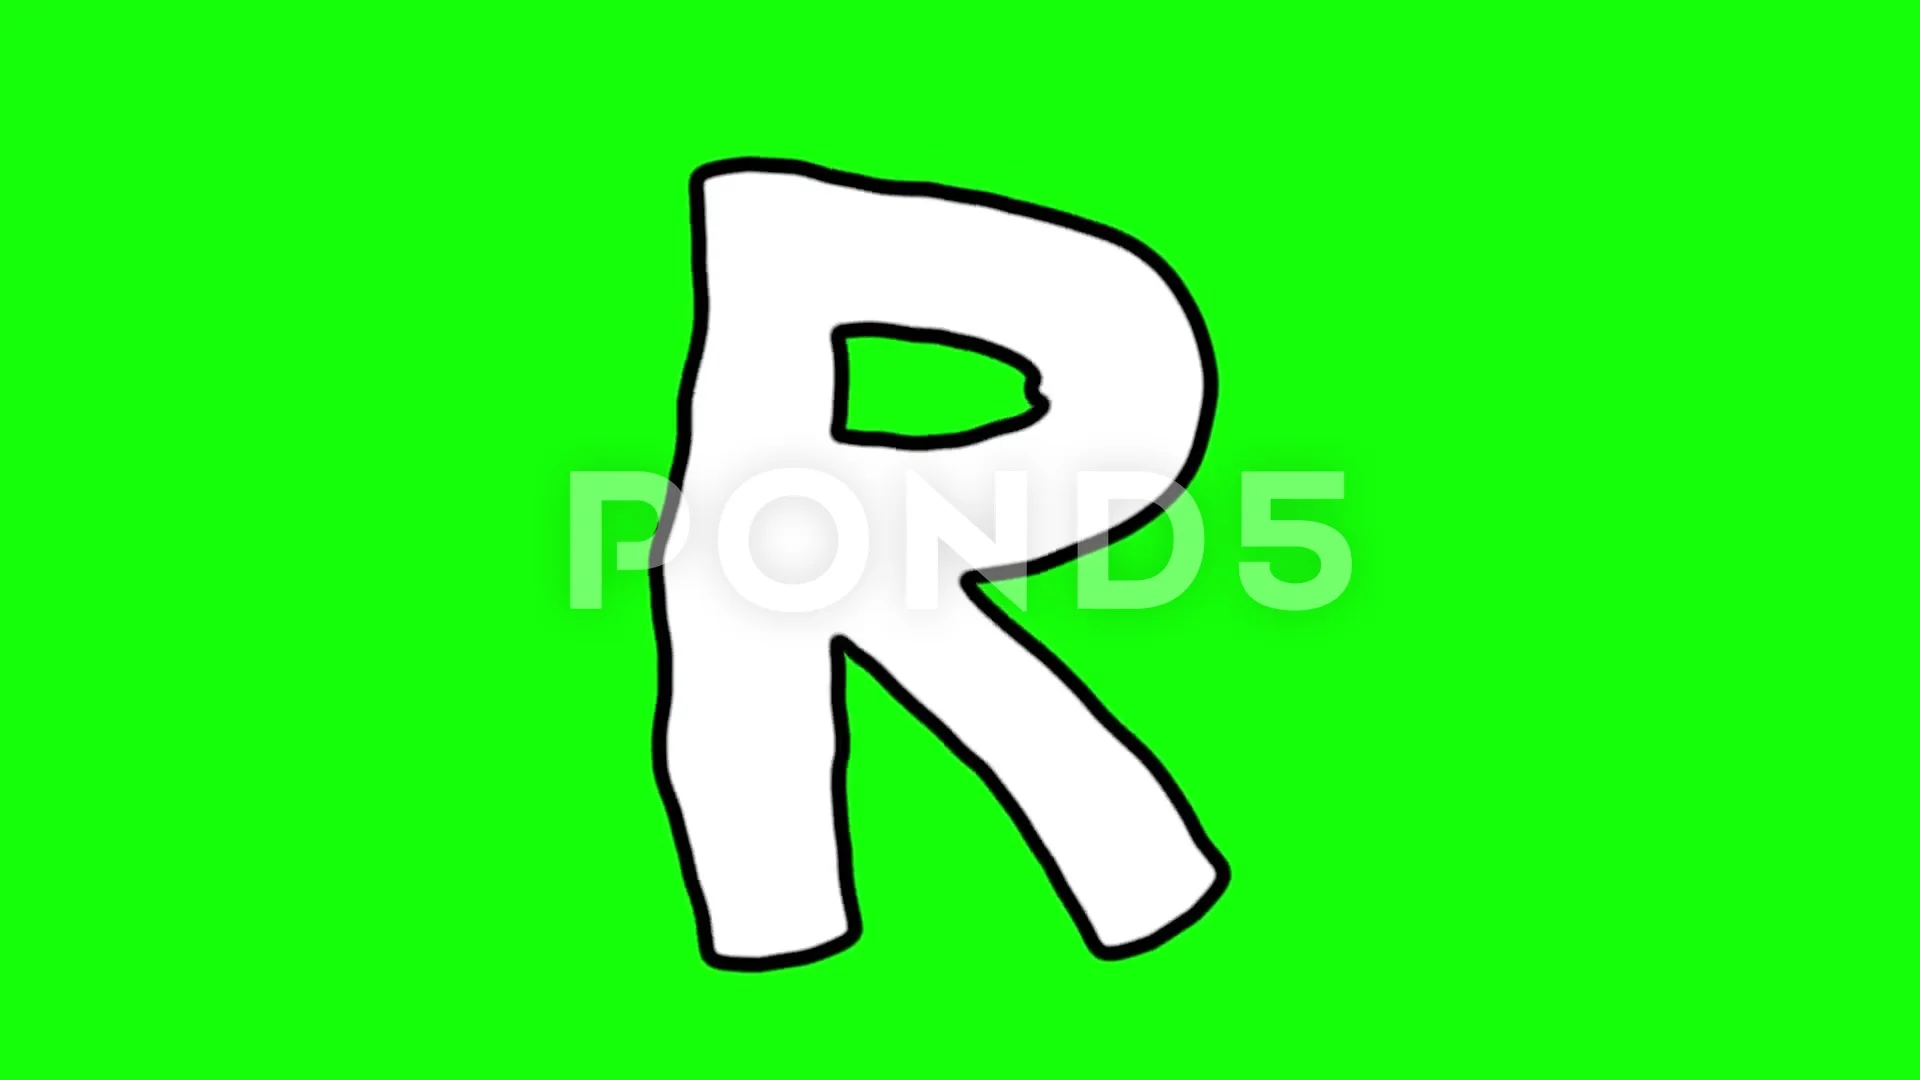 the letter r in green